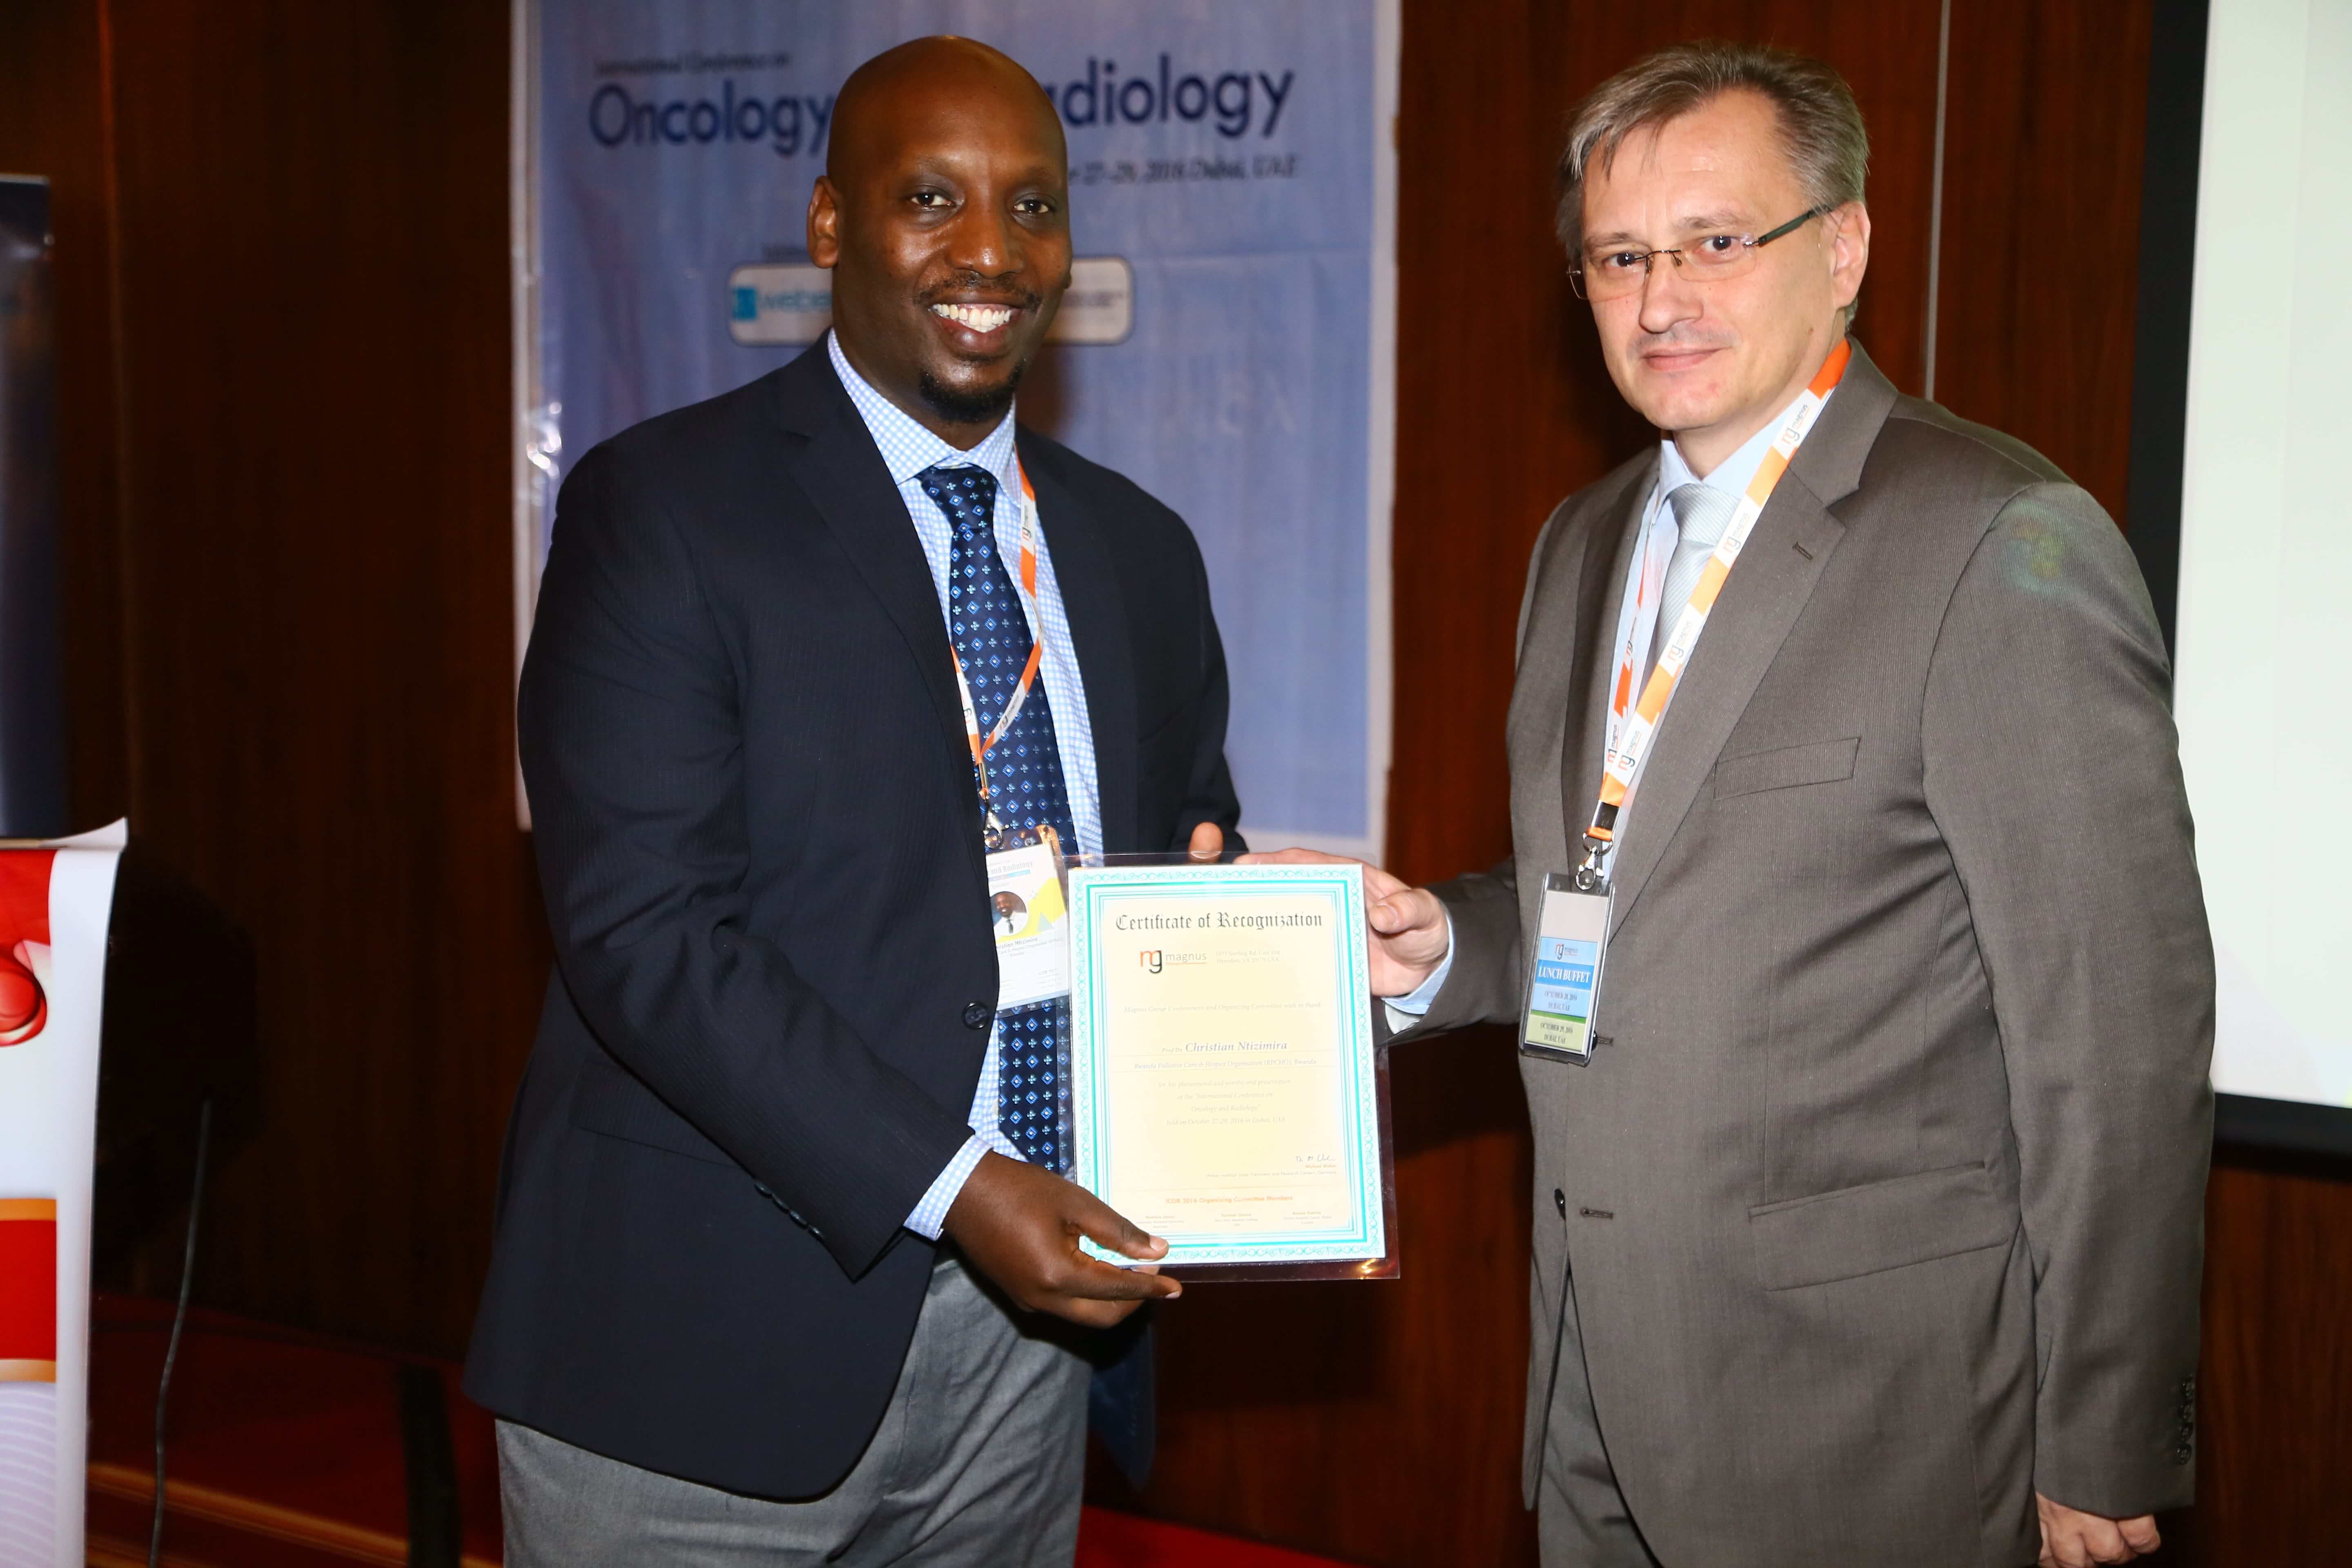 Cancer education conferences - Dr. Christian Ntizimira